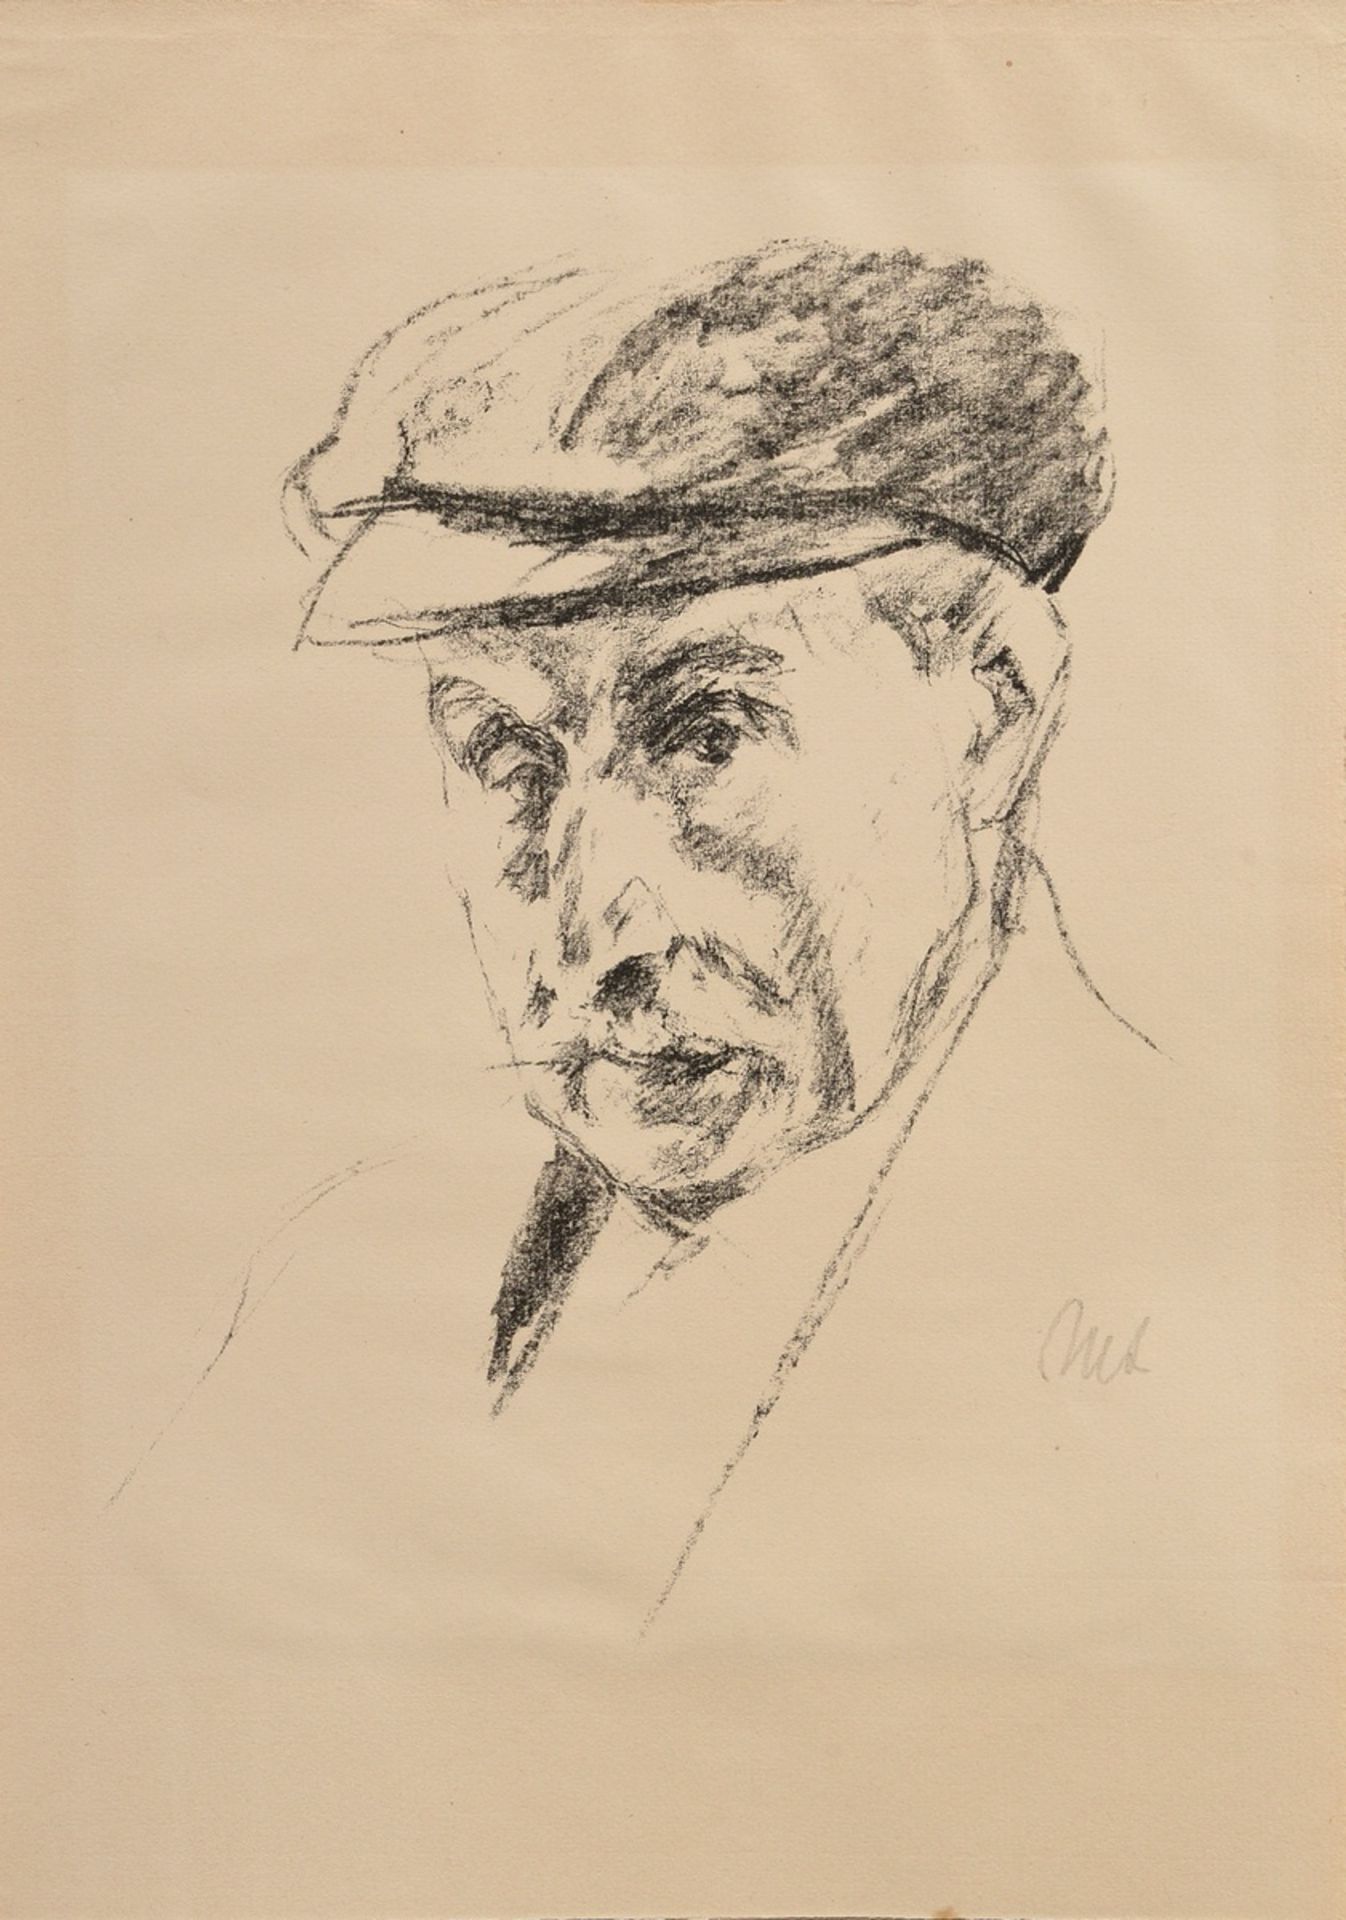 Liebermann, Max (1847-1935) "Self-Portrait with Peaked Cap", lithograph, monogr. b.r., from: "XII. 